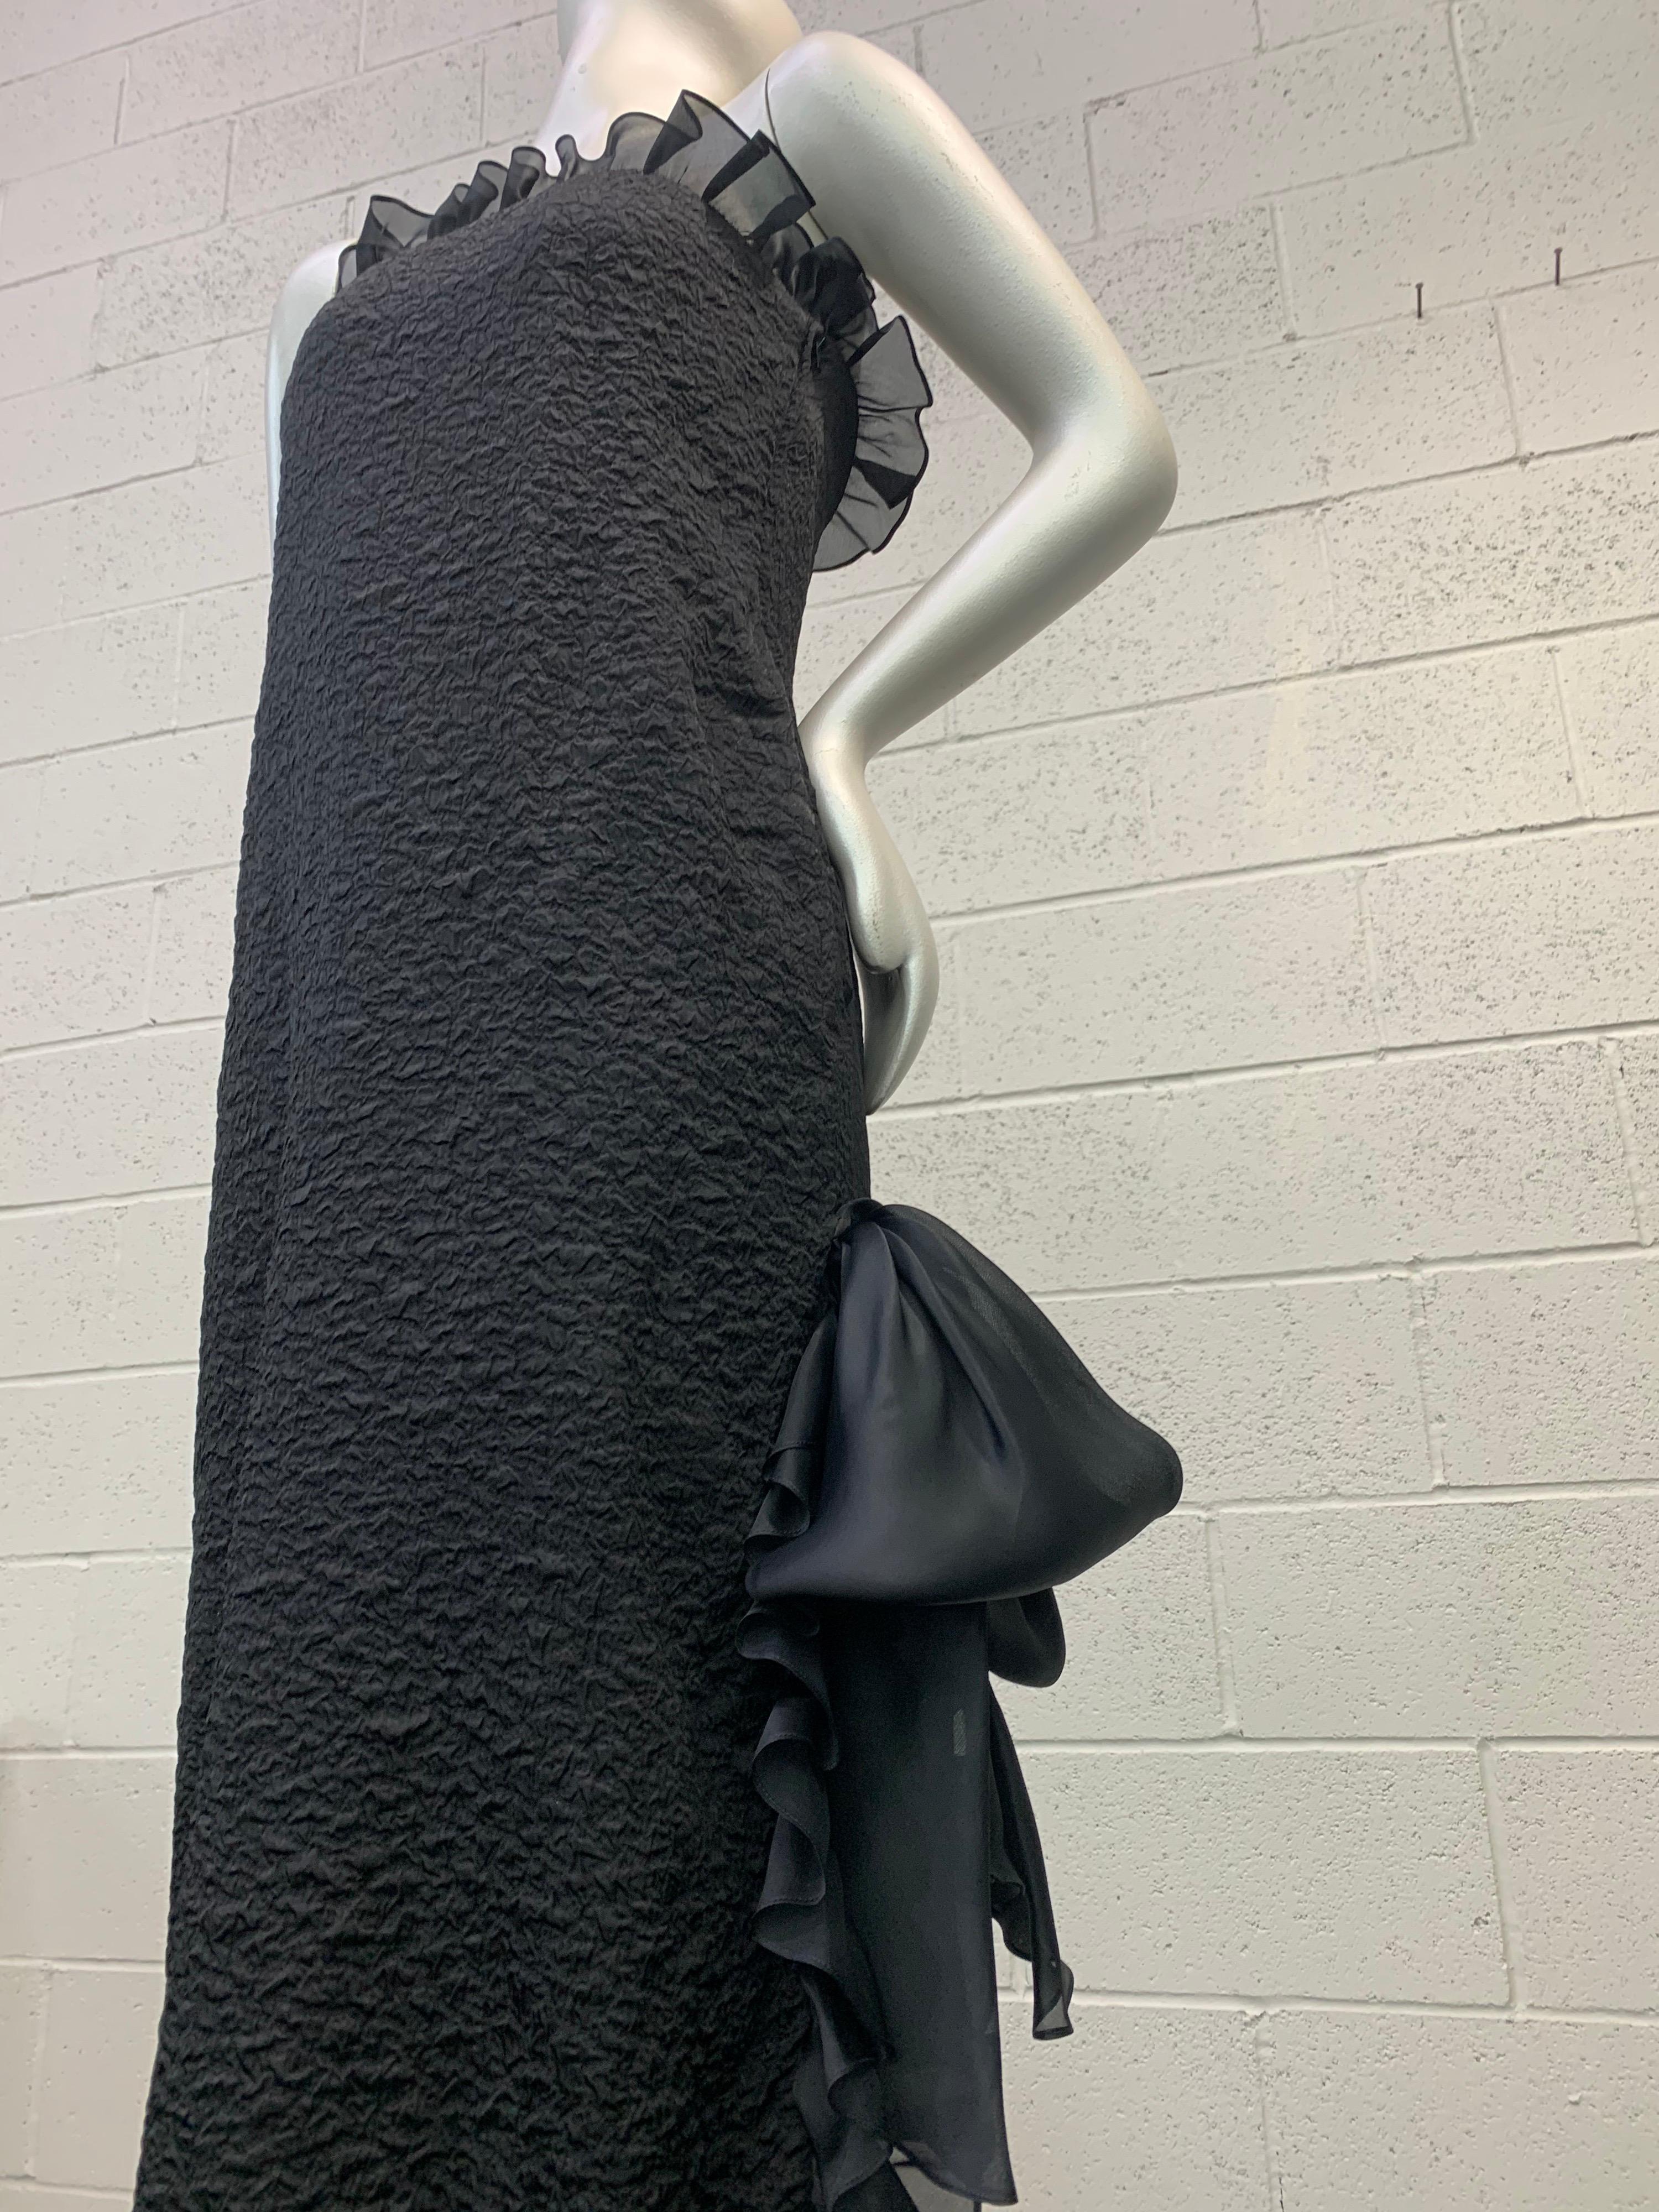 An elegant 1980s Yves Saint Laurent black rayon and acetate textured crepe gown: Simple in silhouette, this slim gown brings focus to the face with an organza ruffle running completely around décolletage and down one side along high side slit.